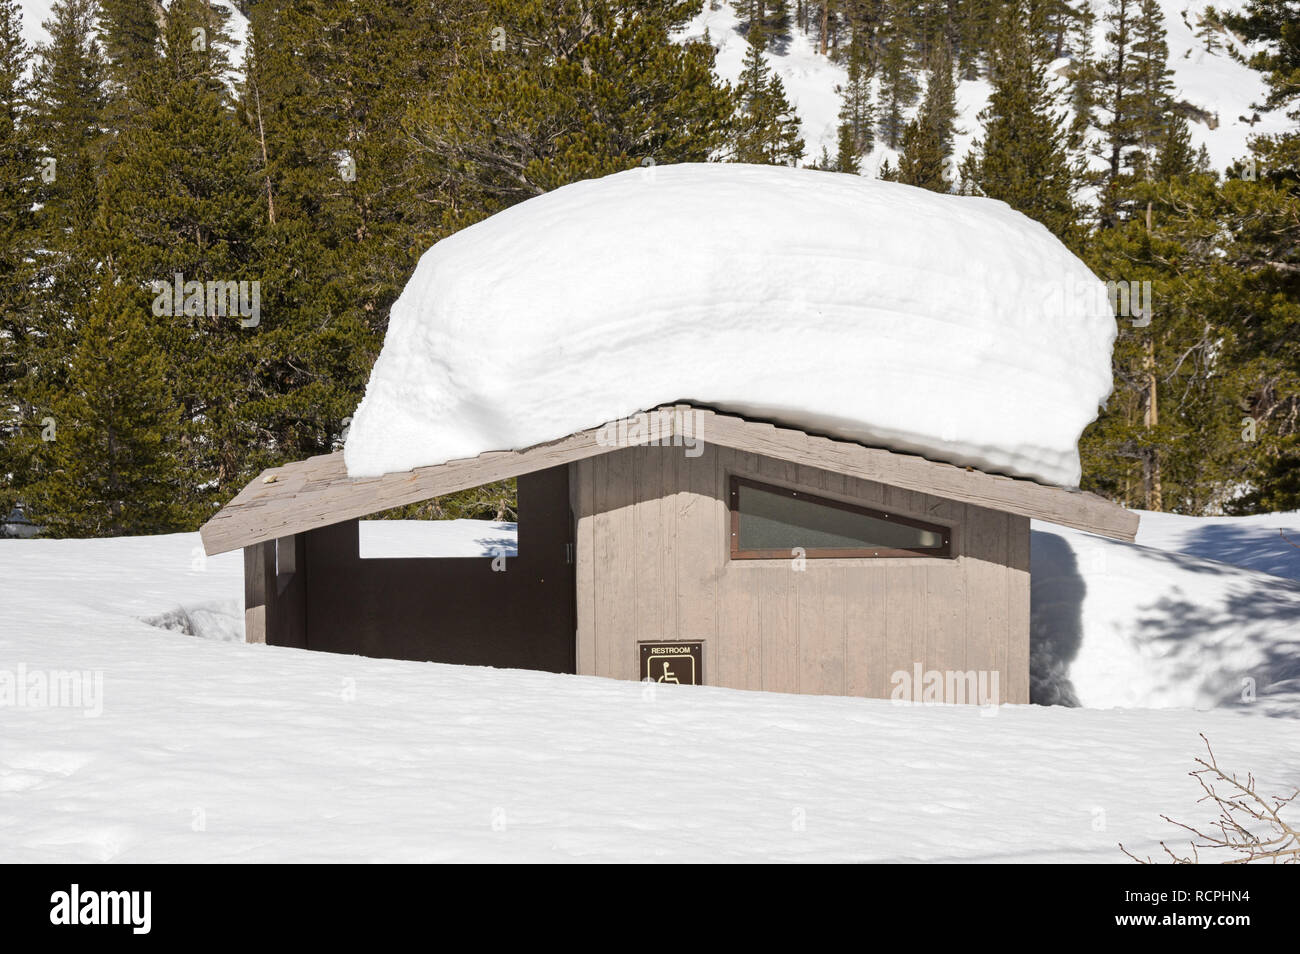 forest service concrete outhouse restroom half covered in deep winter snow Stock Photo